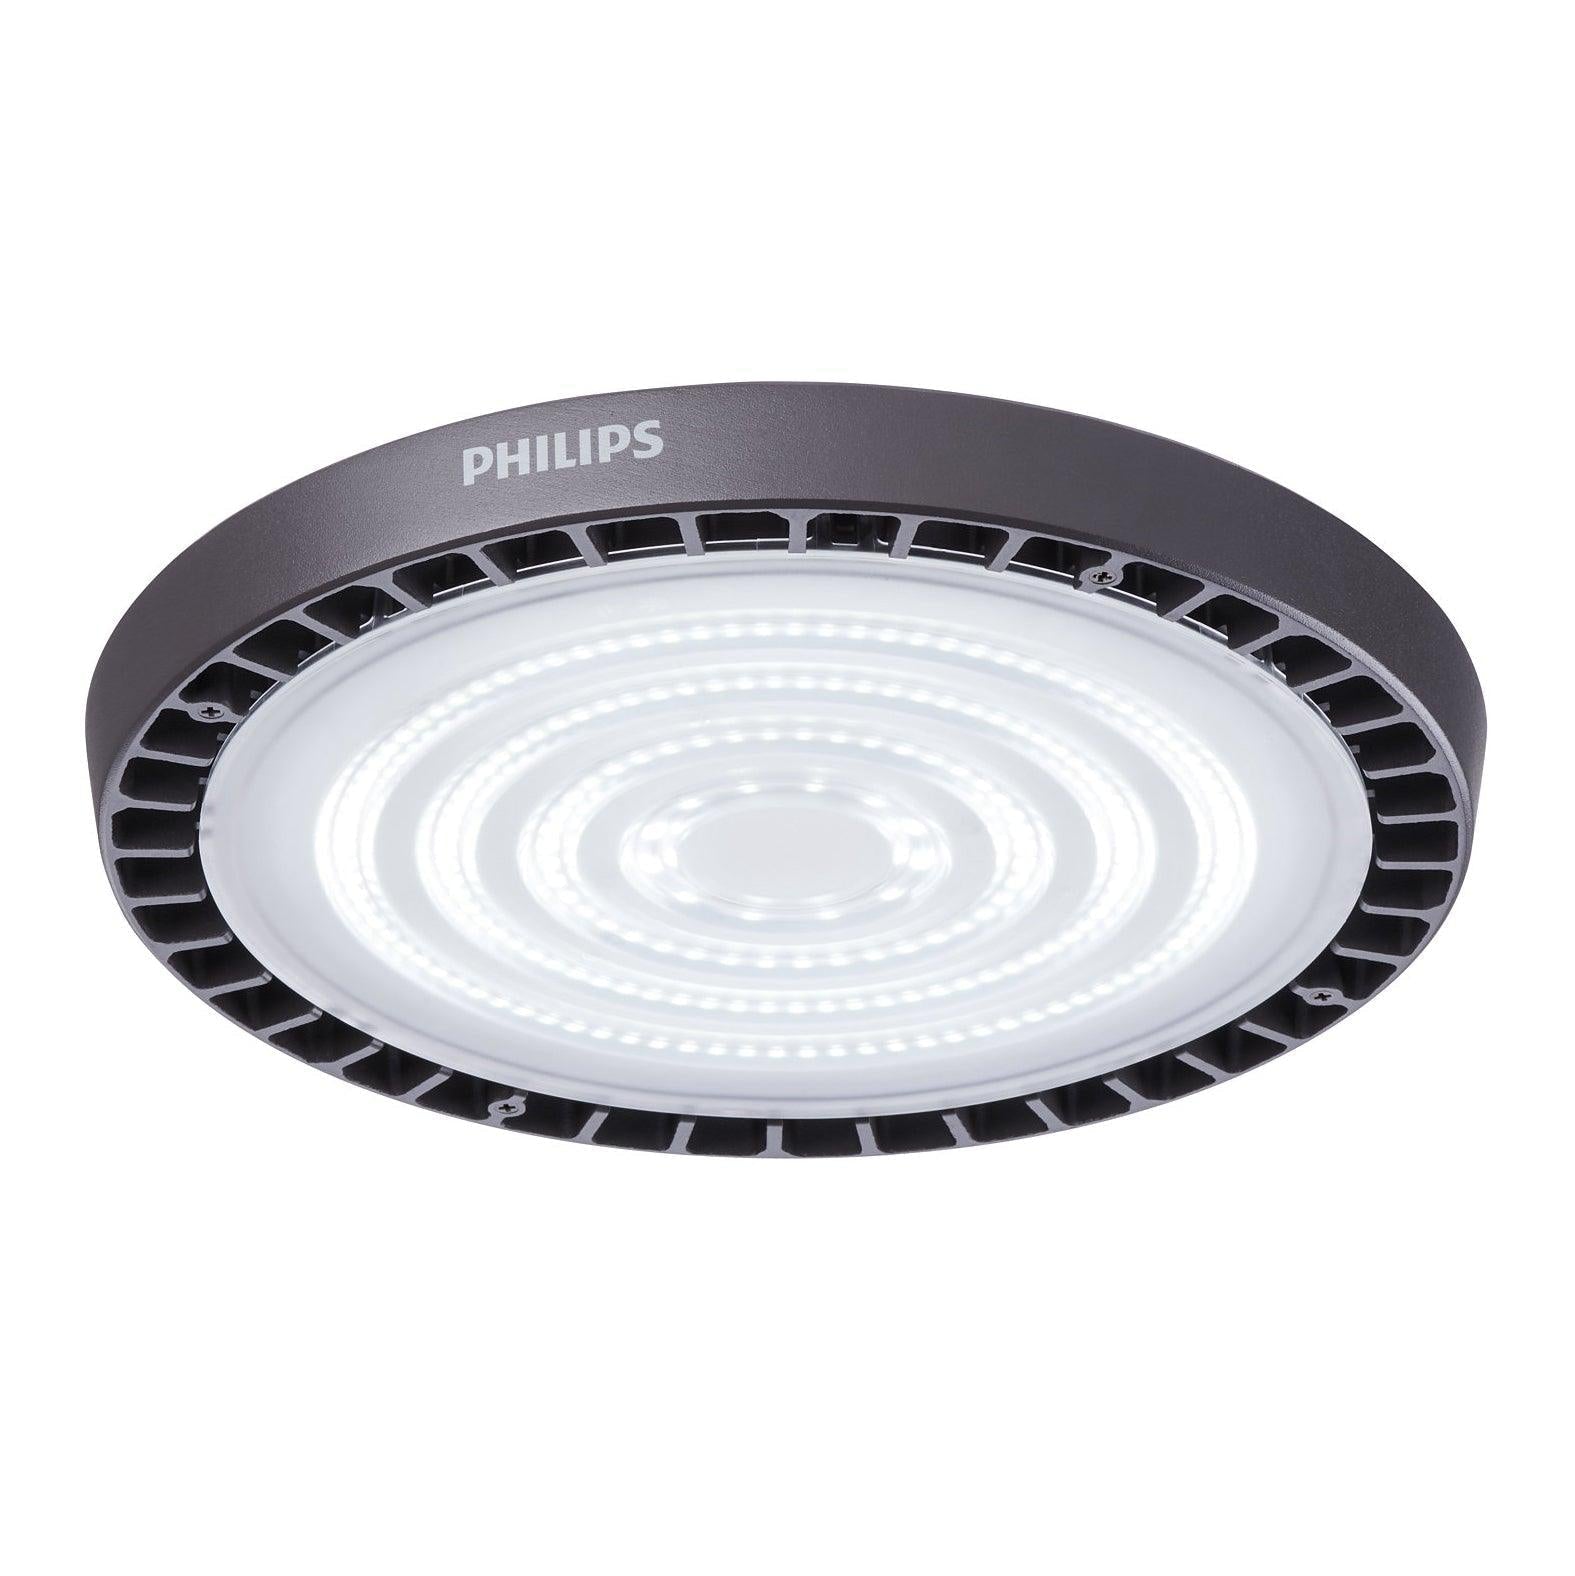 192w Philips GreenPerform LED Highbay G4, 26500lm (135lm/w), 3 Year Warranty, IP65, Gold-RS Range - Clear Sky Distributers  (7558412959931)